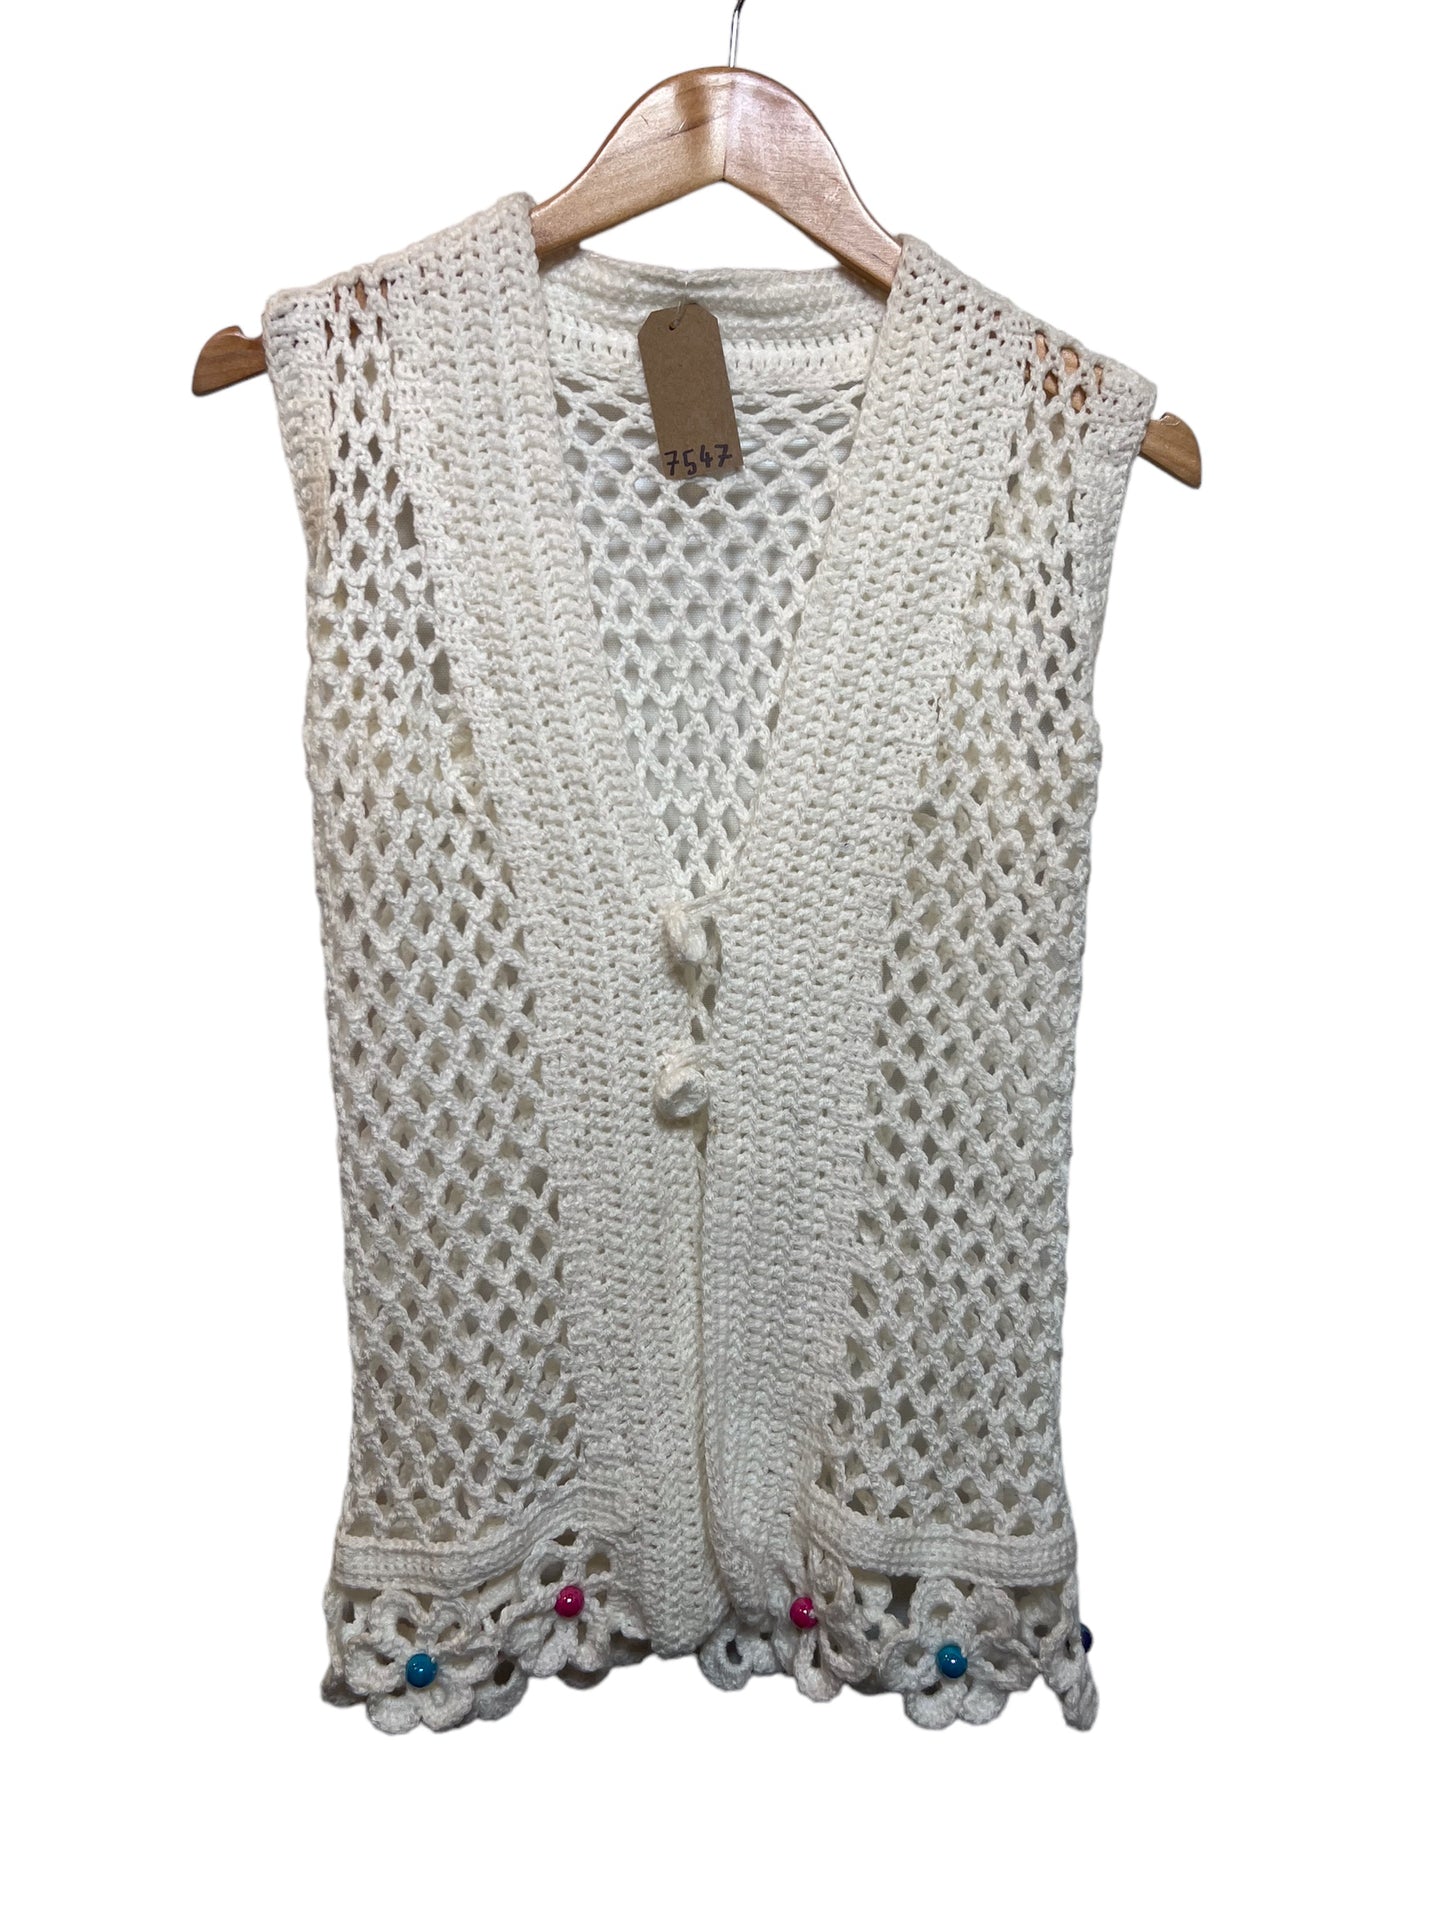 Women’s White Knitted top (Size M)